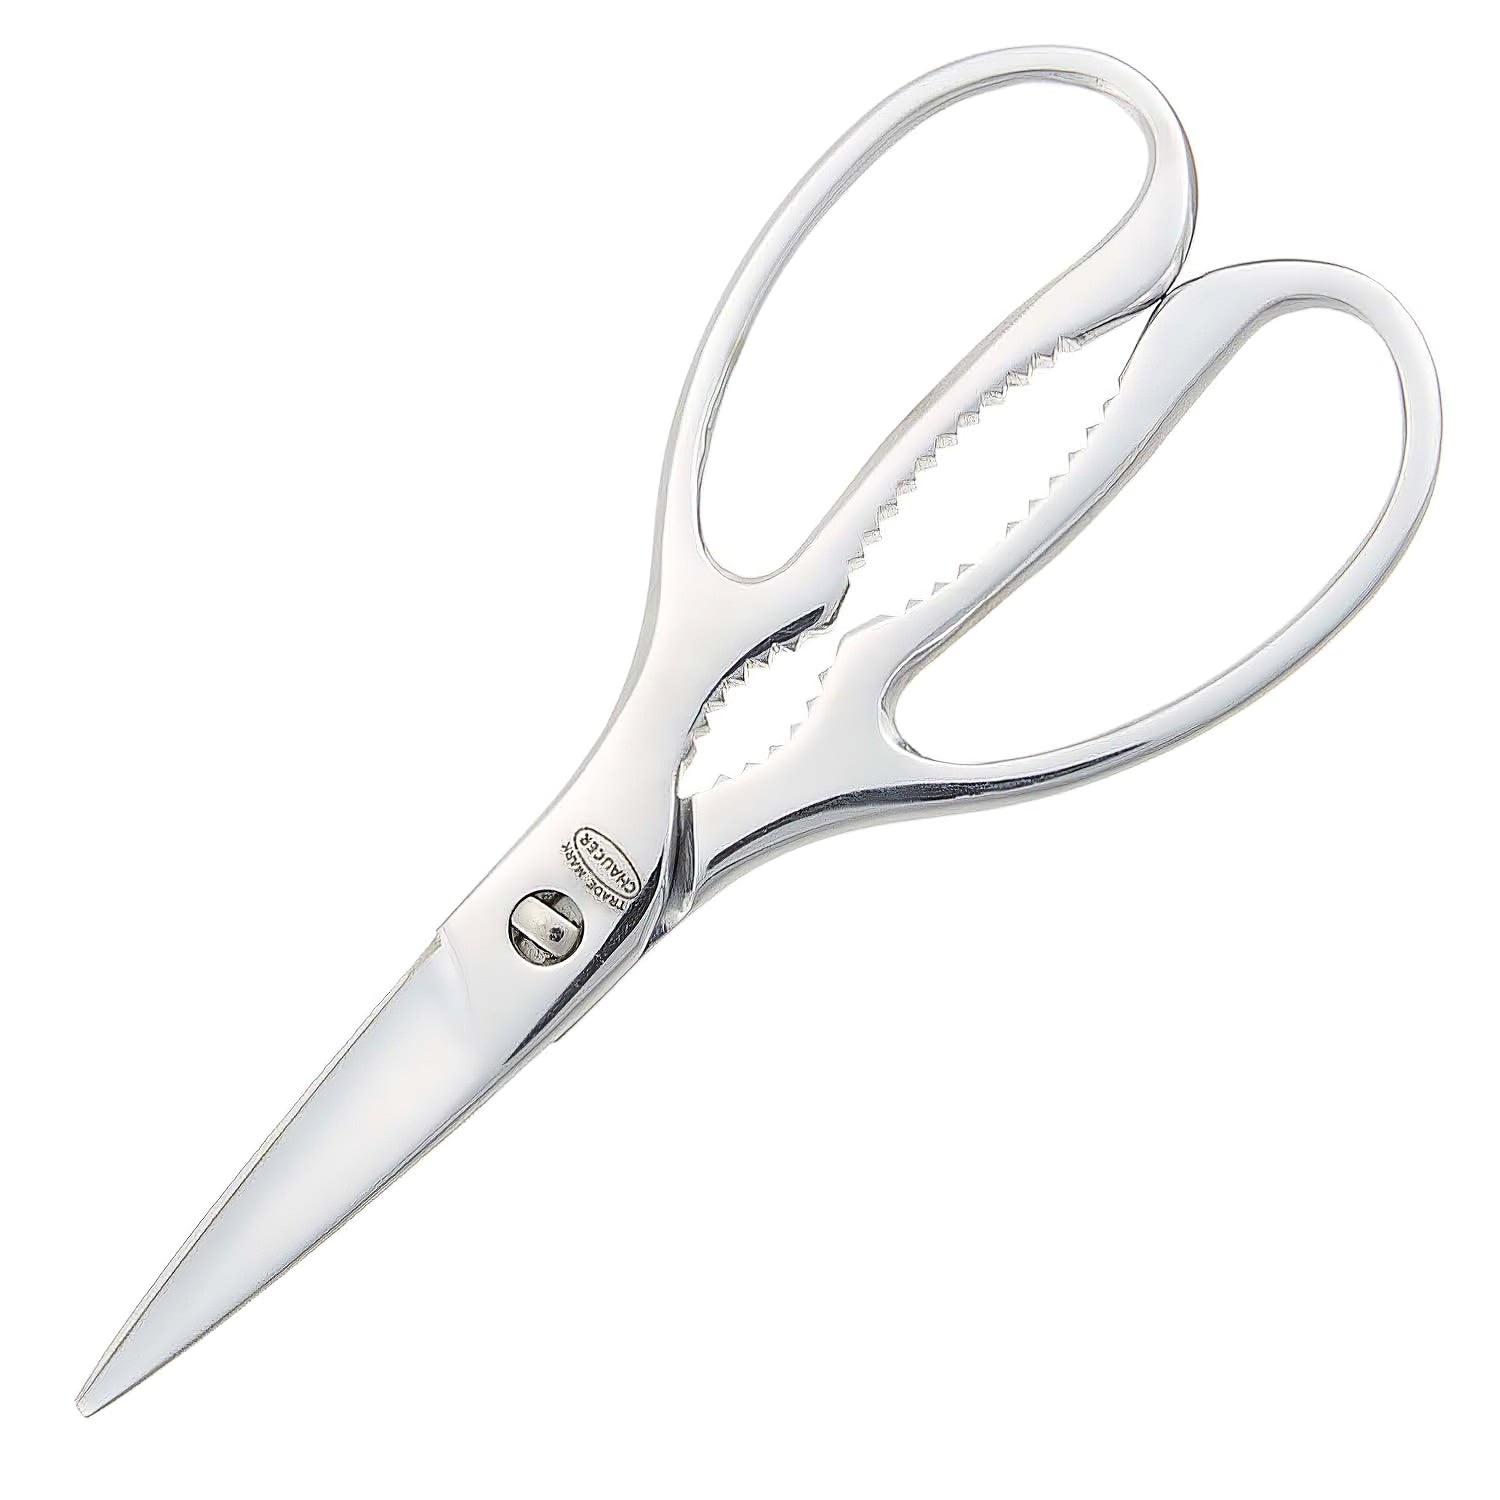 Japanese Kitchen Shears Solid Stainless Steel KS-215